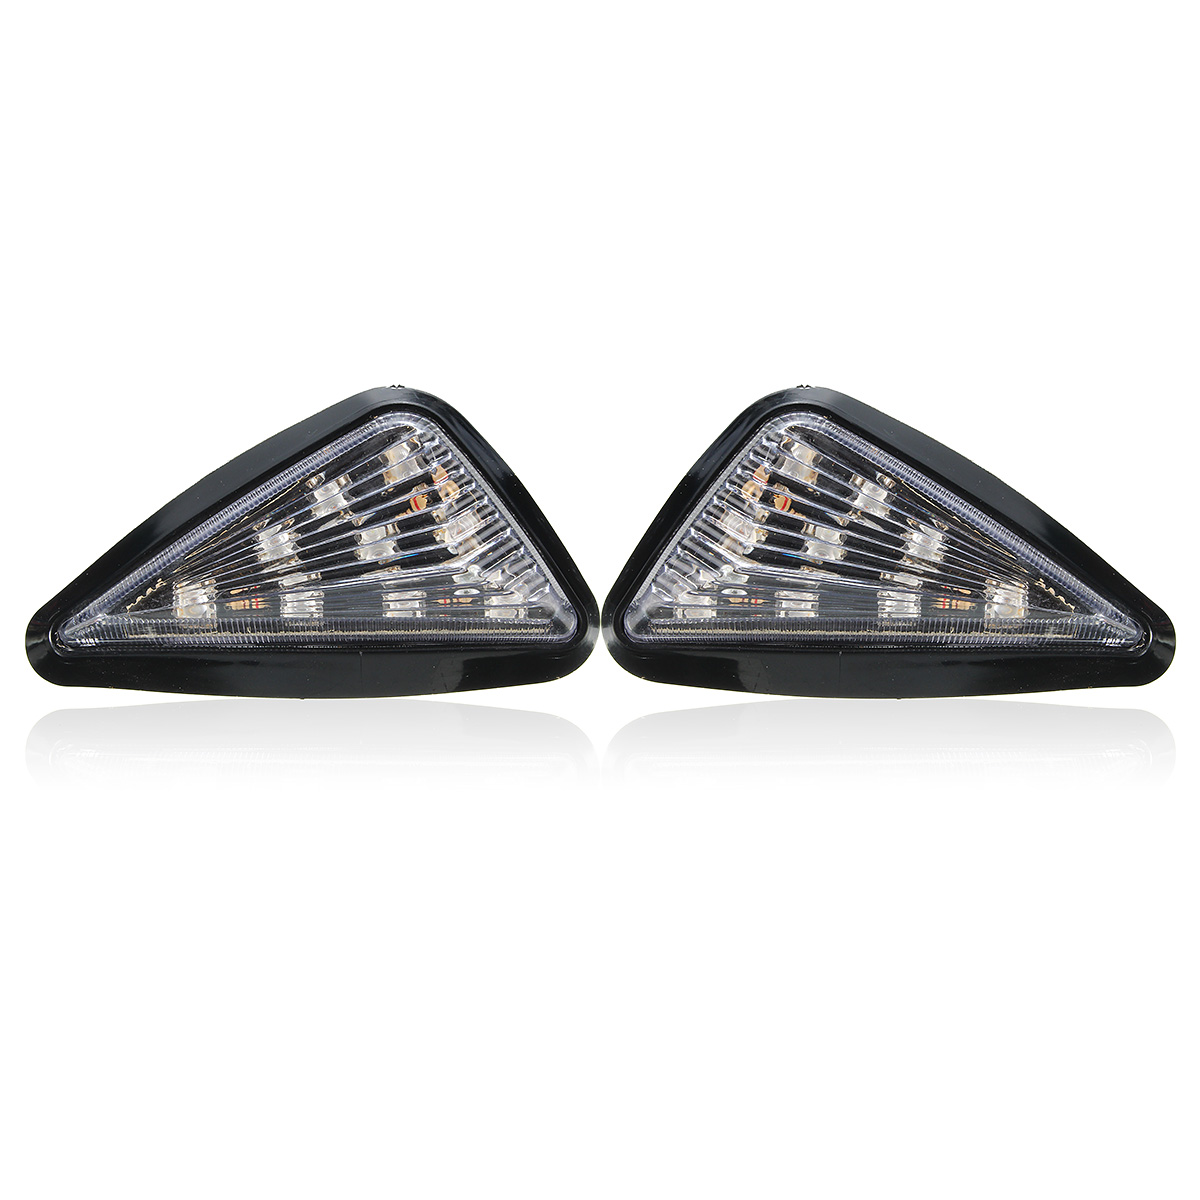 Pair Motorcycle 11 LED Turn Signals Lights Indicators Triangle Abmer